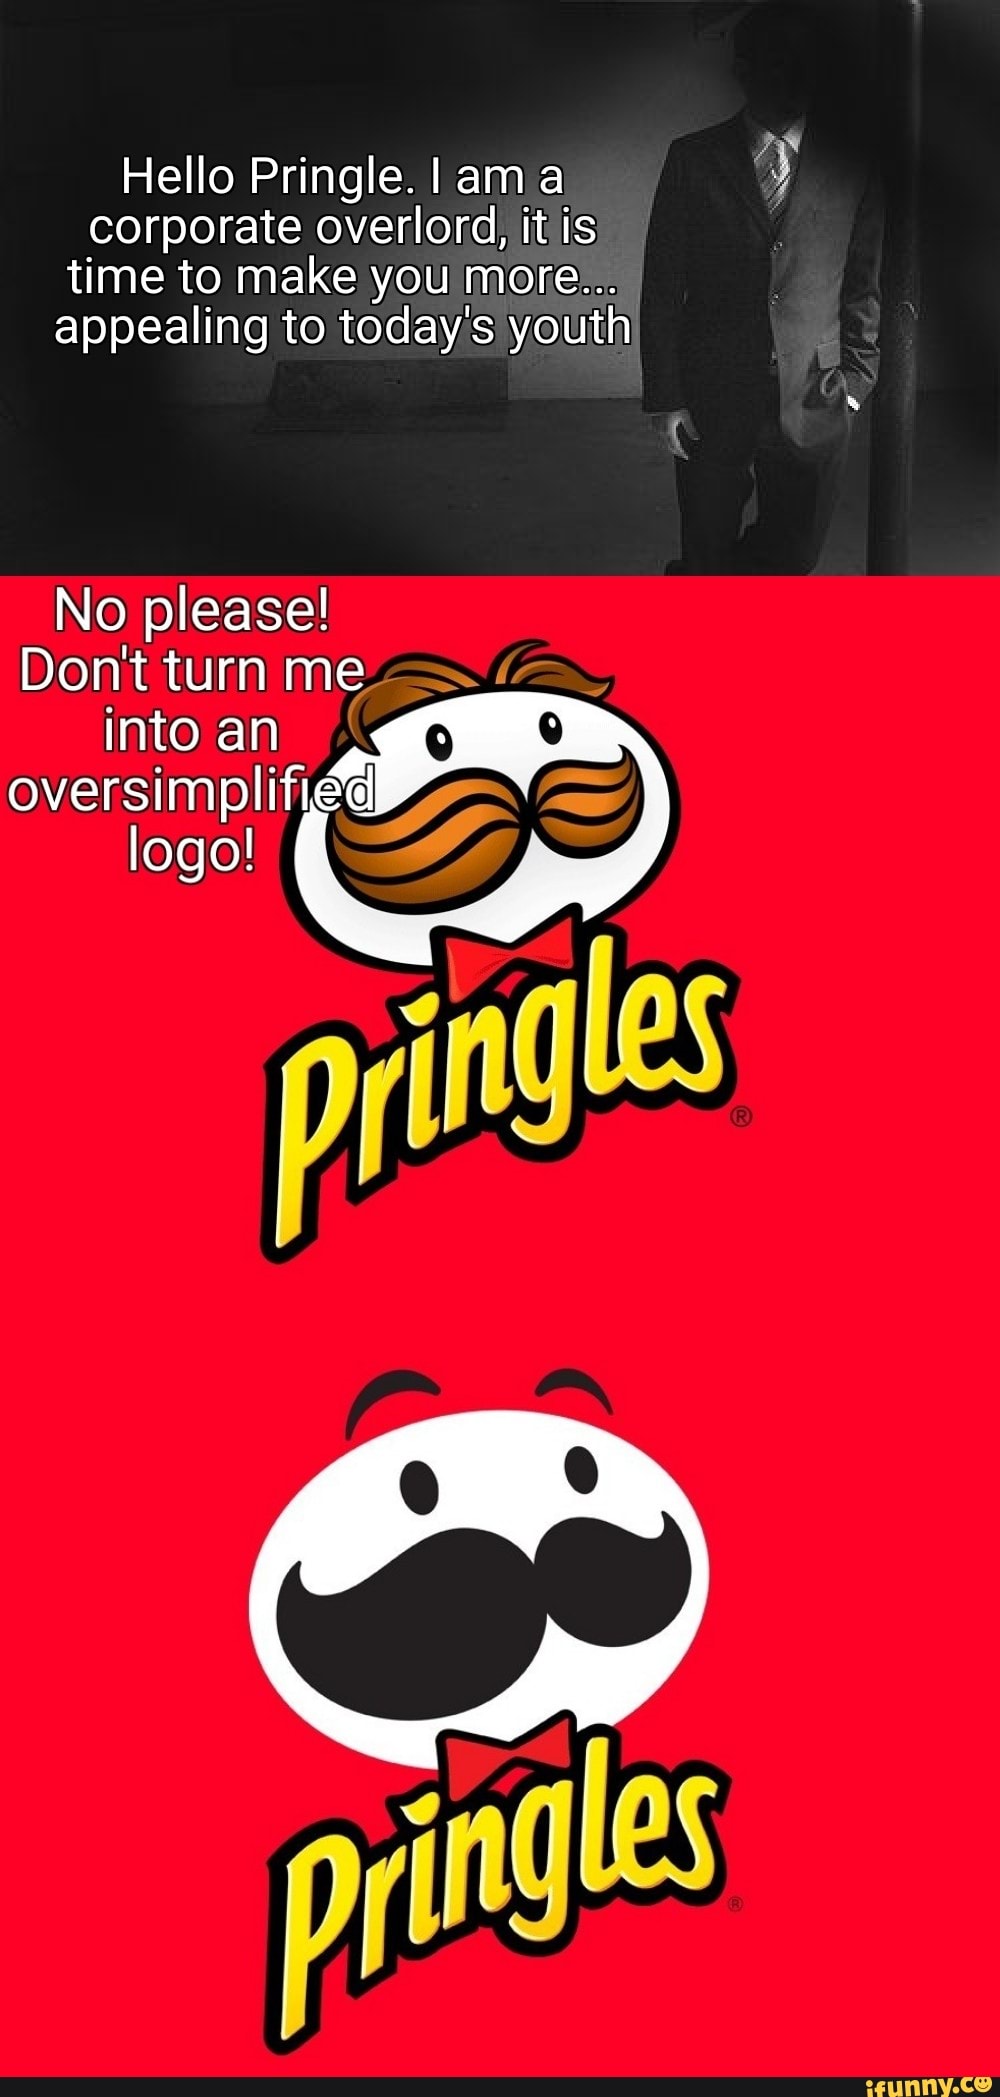 Hello Pringle. I ama corporate overlord, it is time to make you more ...